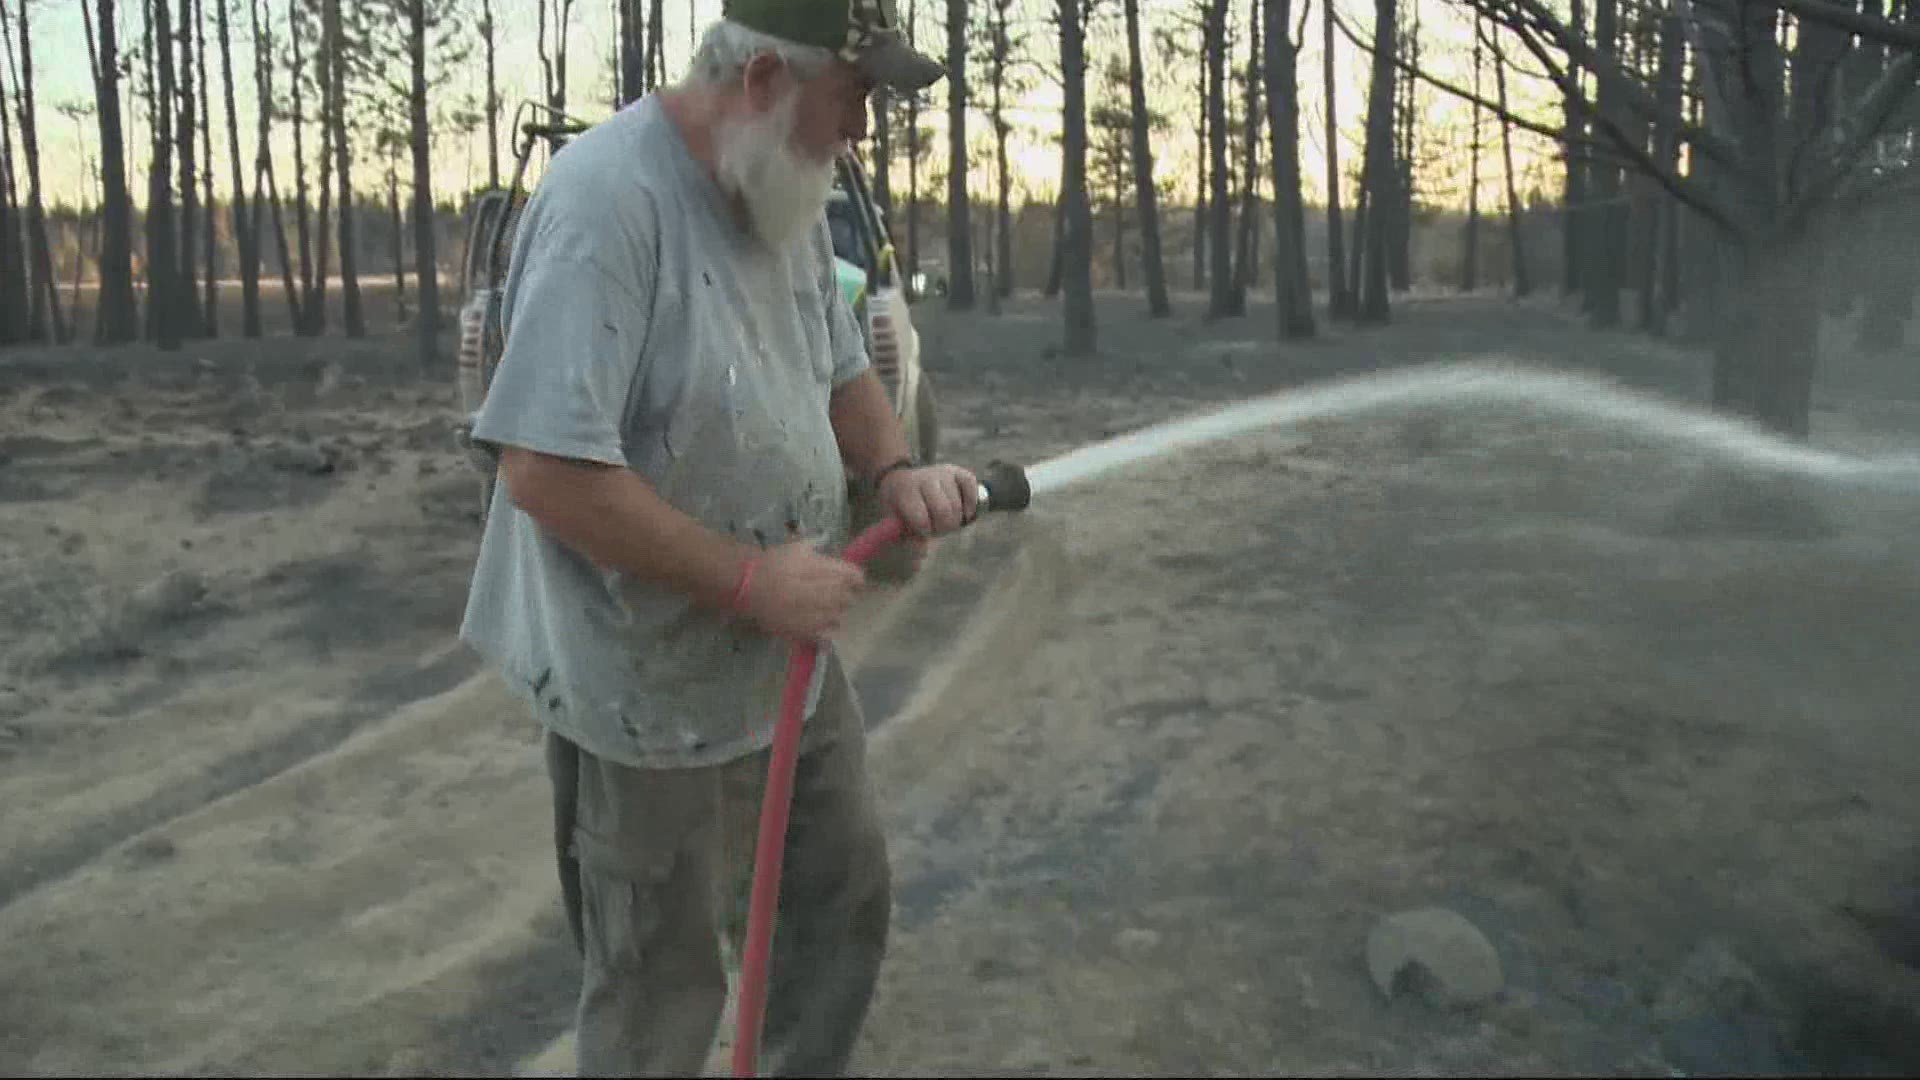 The Bootleg Fire is making national headlines but it has taken nearly everything from many in Bly.